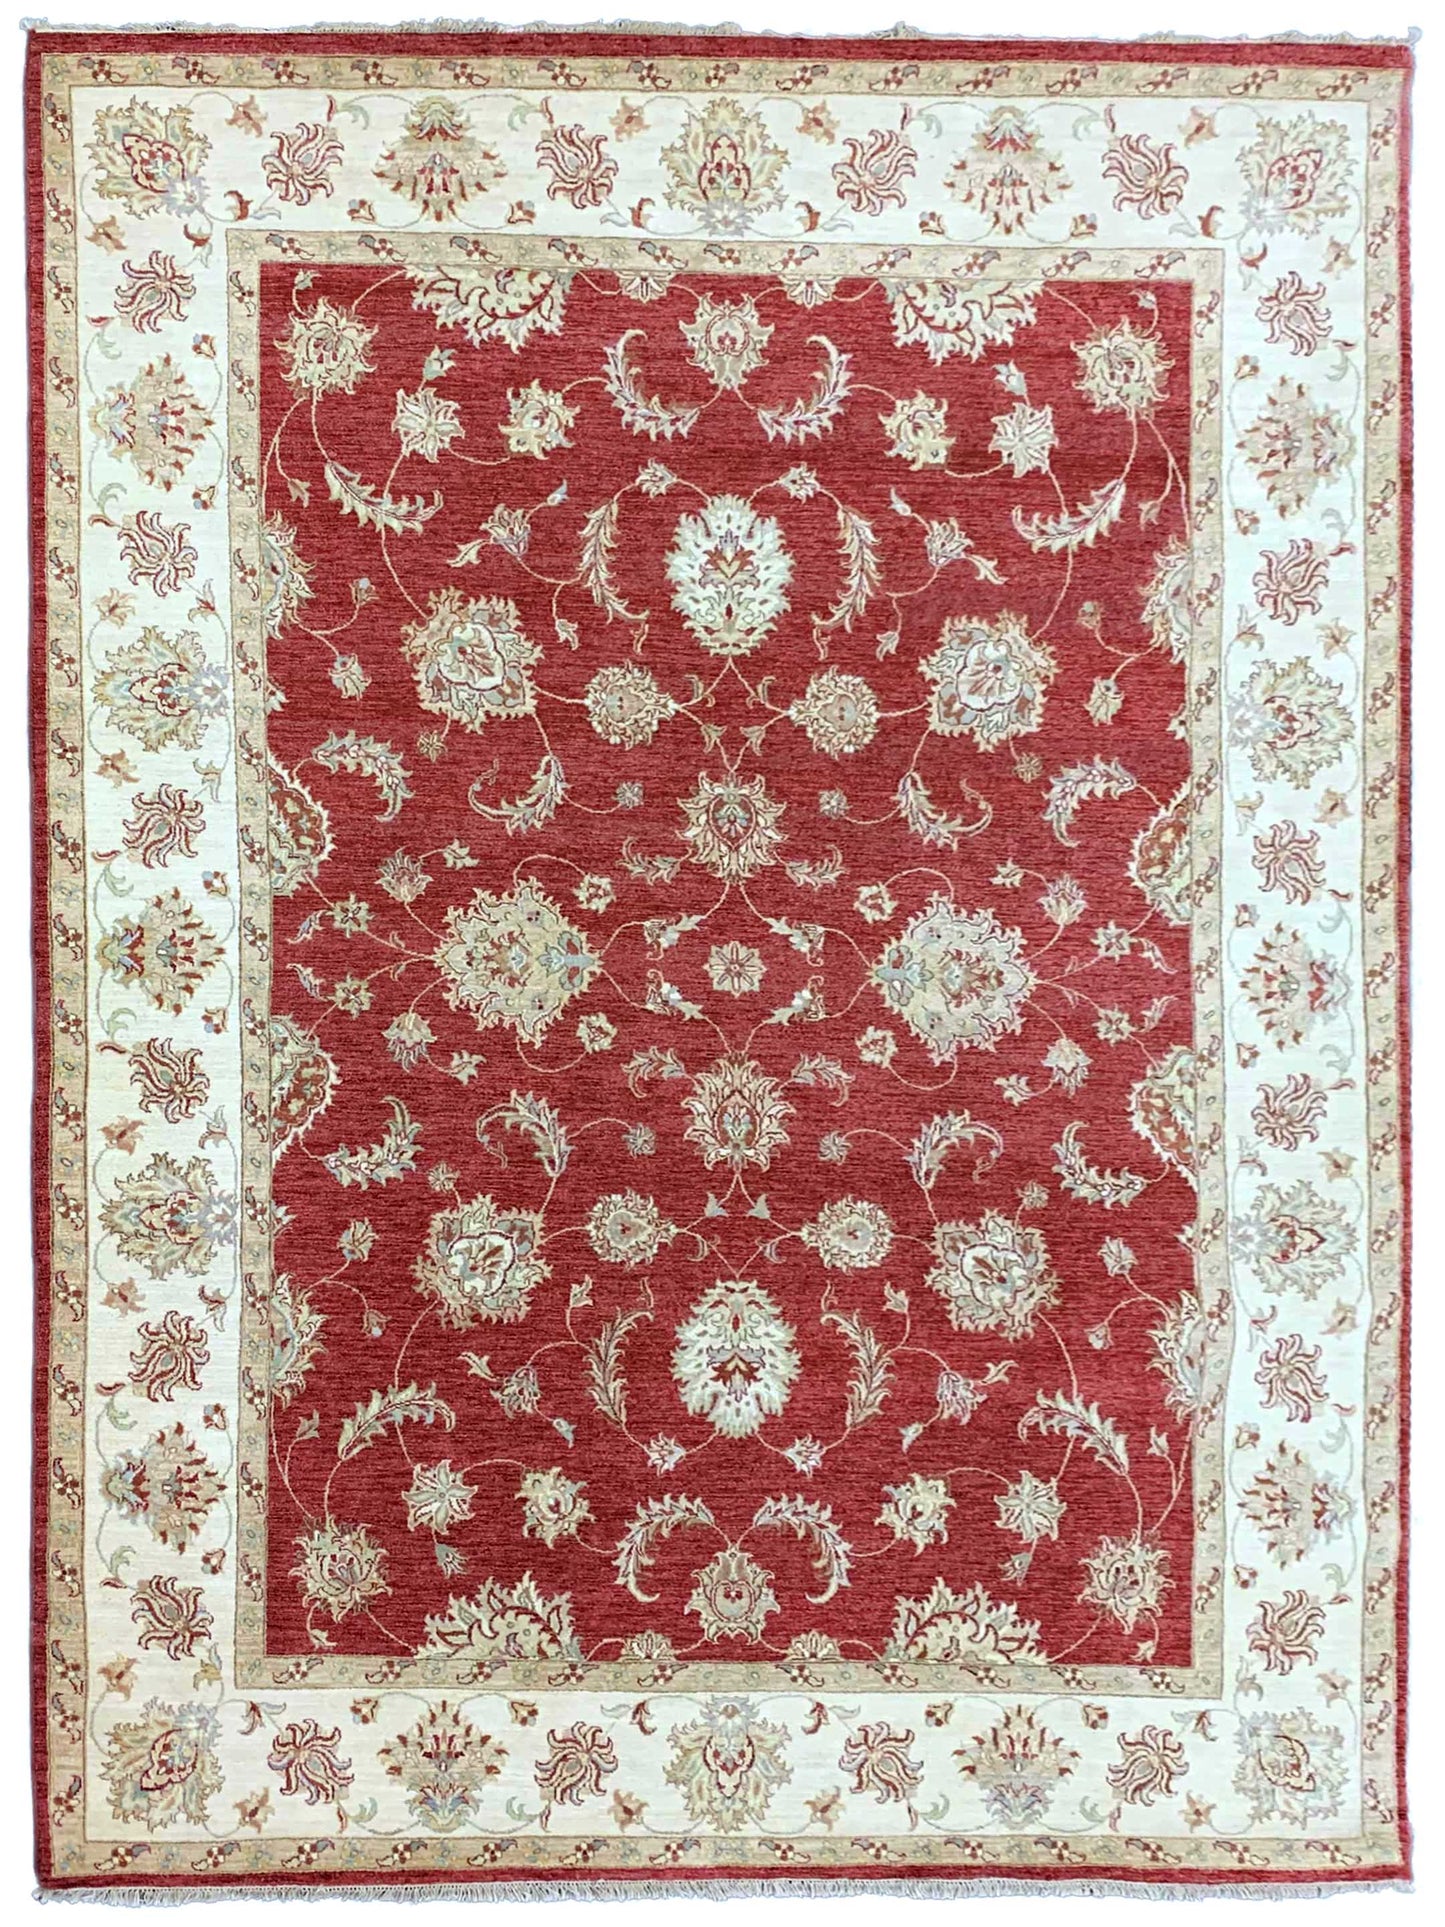 Artisan Zara ZL-109 Red Traditional Knotted Rug